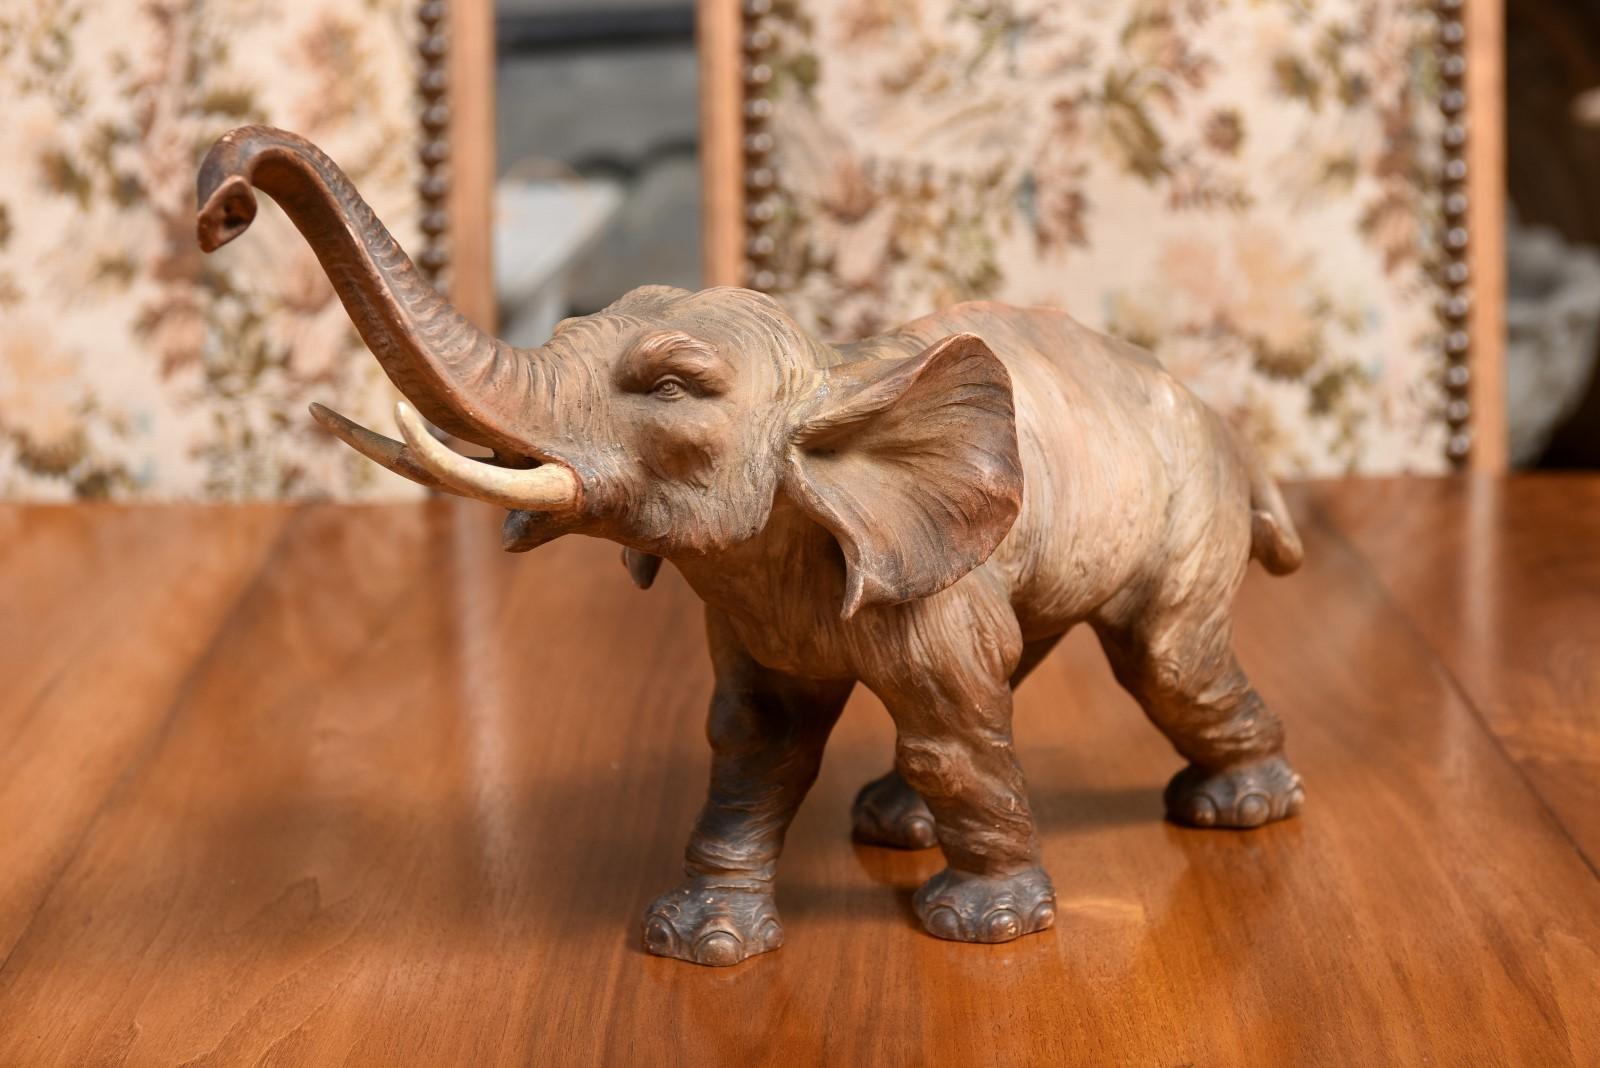 French 19th Century Terracotta Sculpture Depicting a Walking Asian Elephant For Sale 6